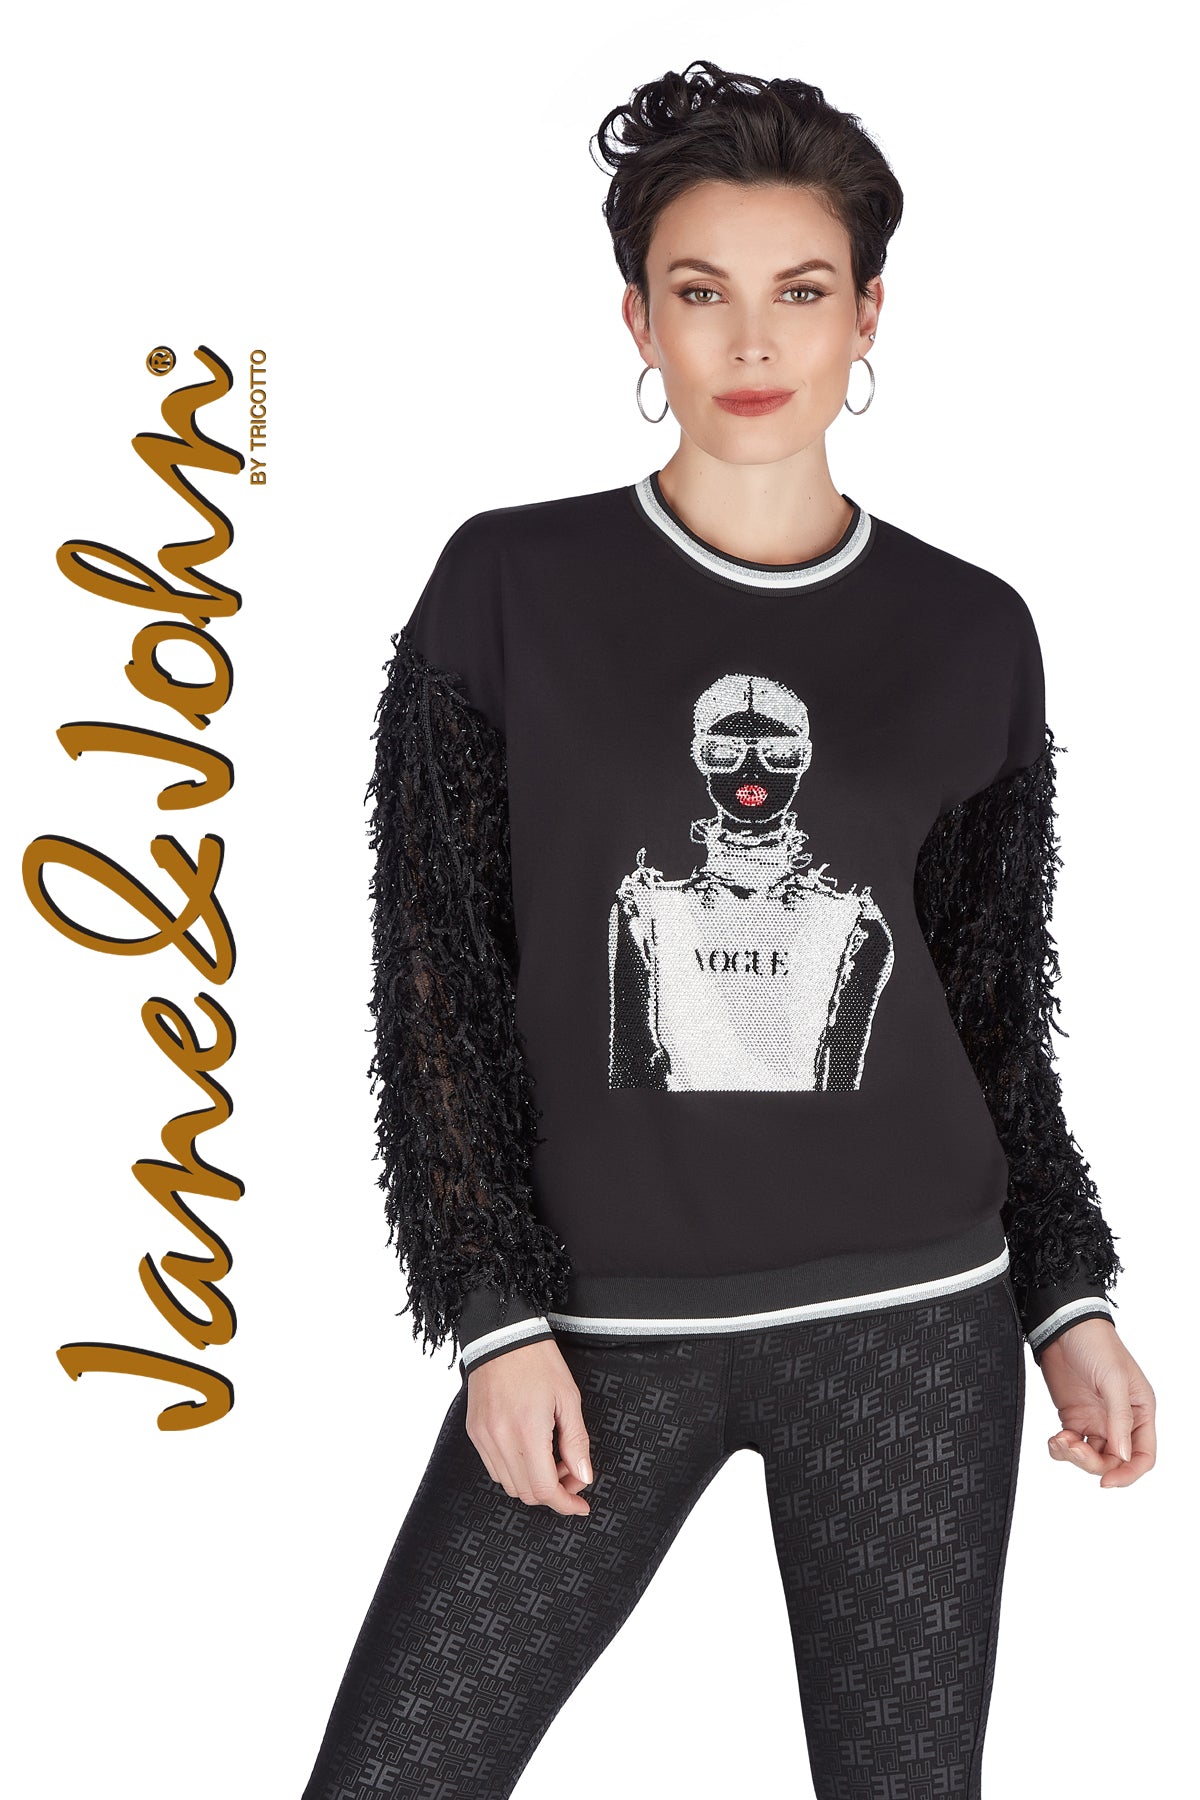 Tricotto Sweaters-Jane & John Clothing-Tricotto Clothing Montreal-Tricotto Online Shop